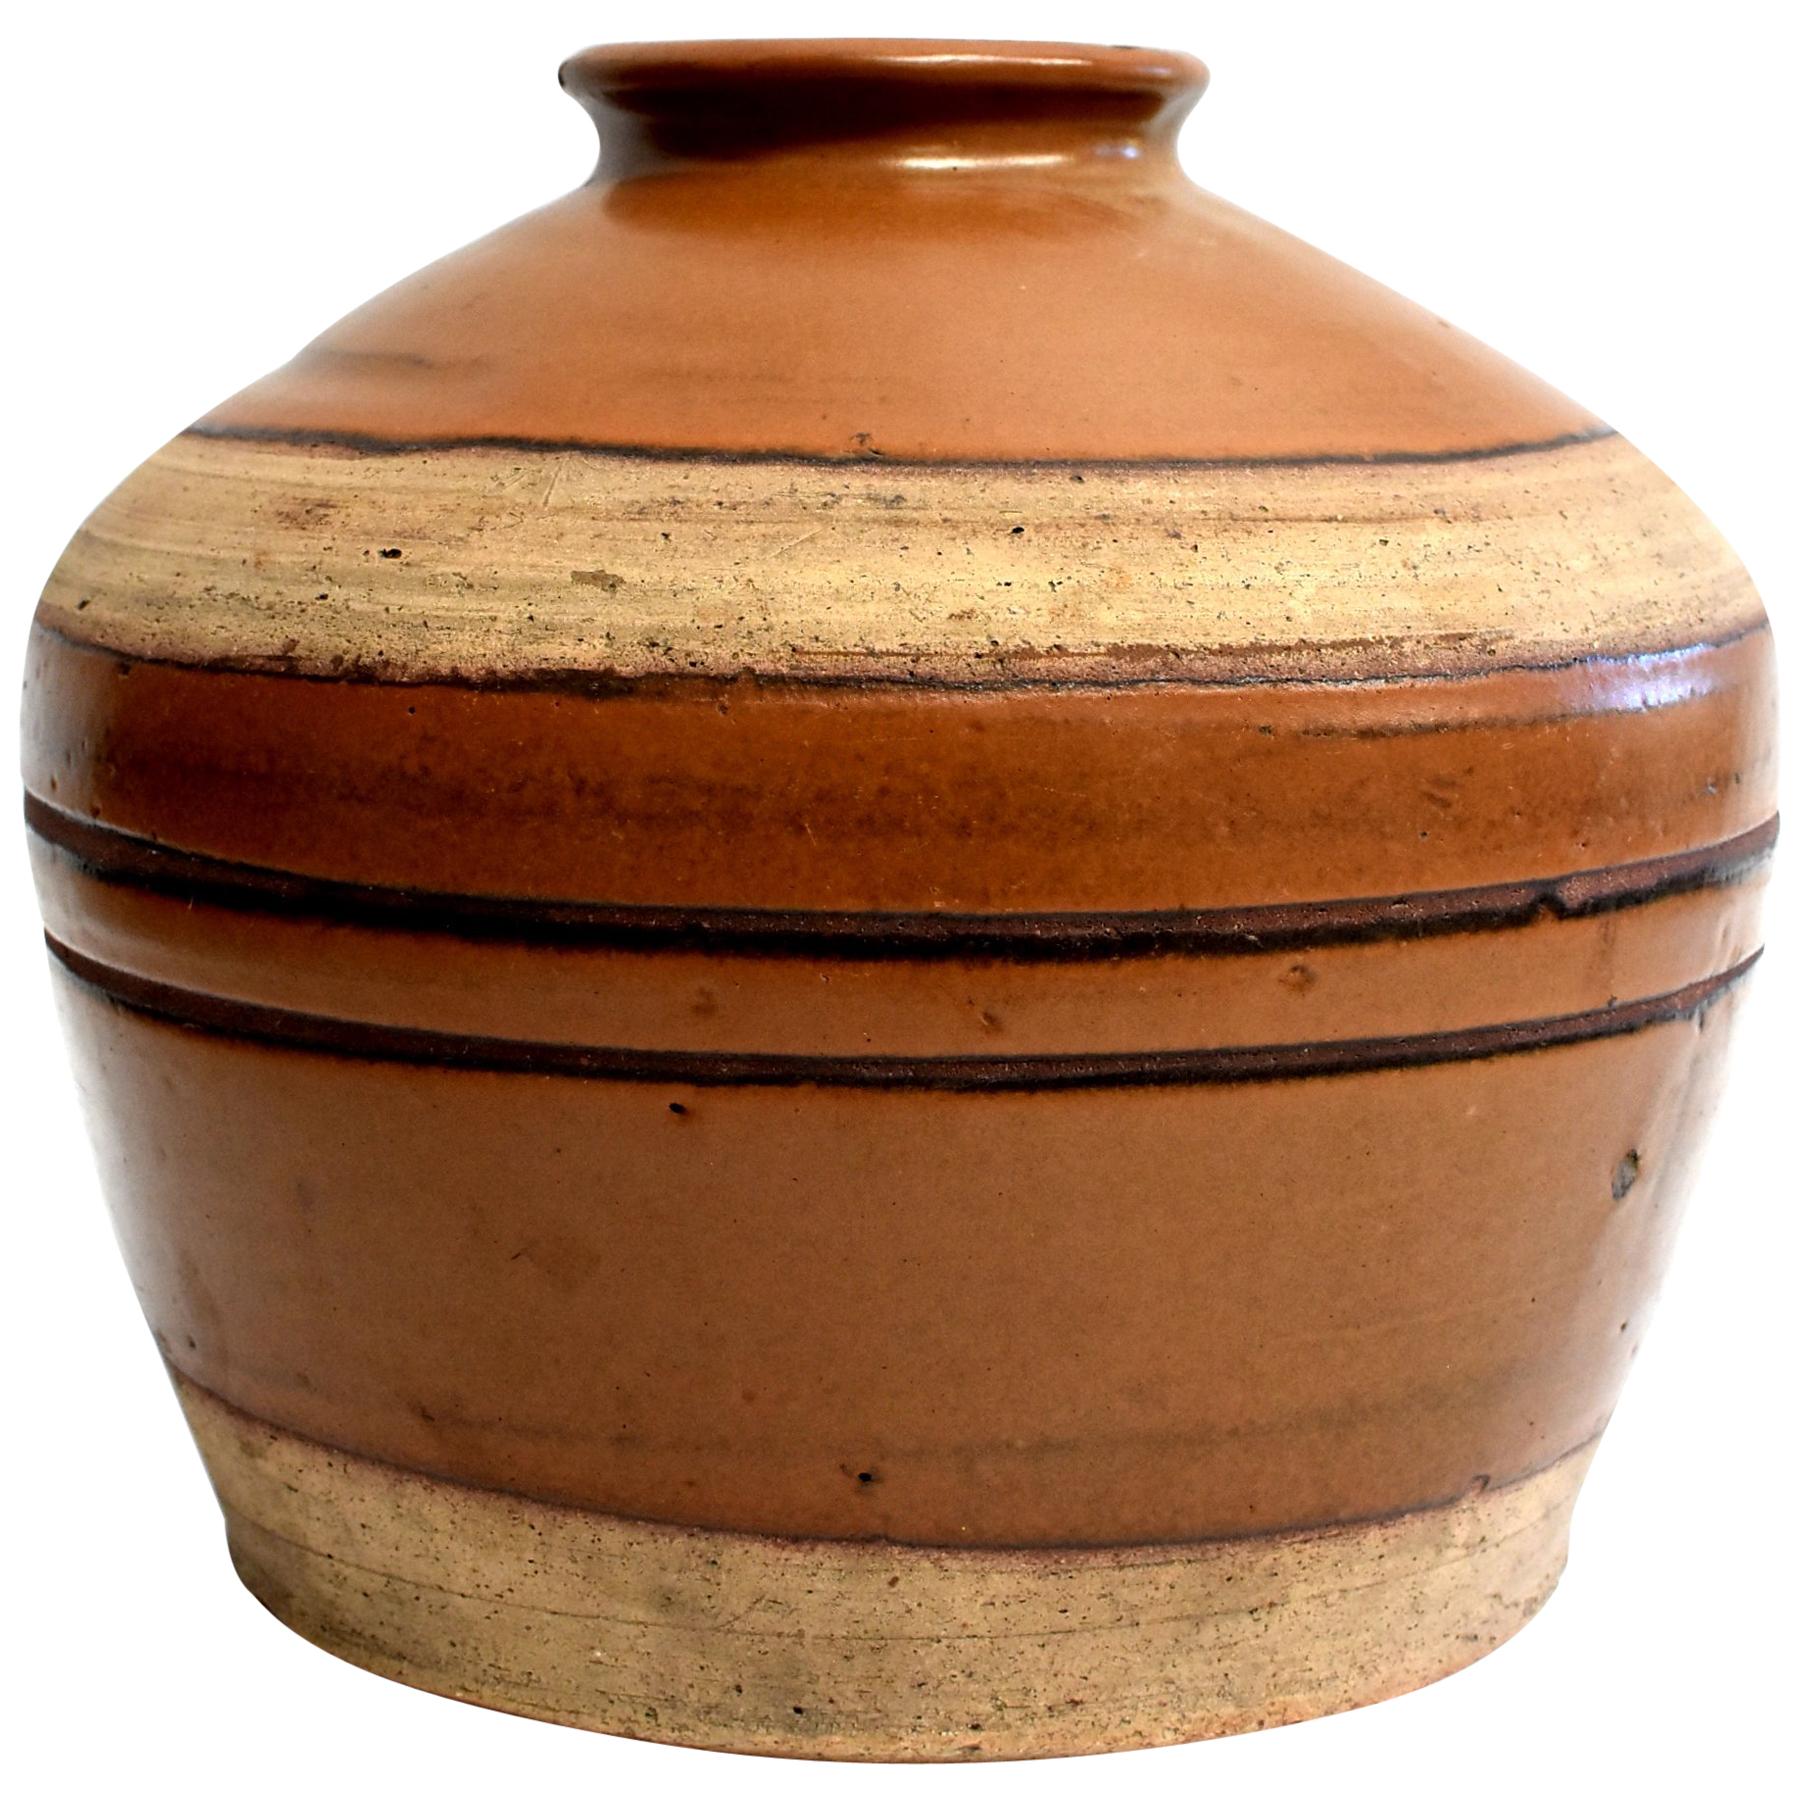 Large Antique Brown Jar with Black Rings, Handmade Chinese Pottery